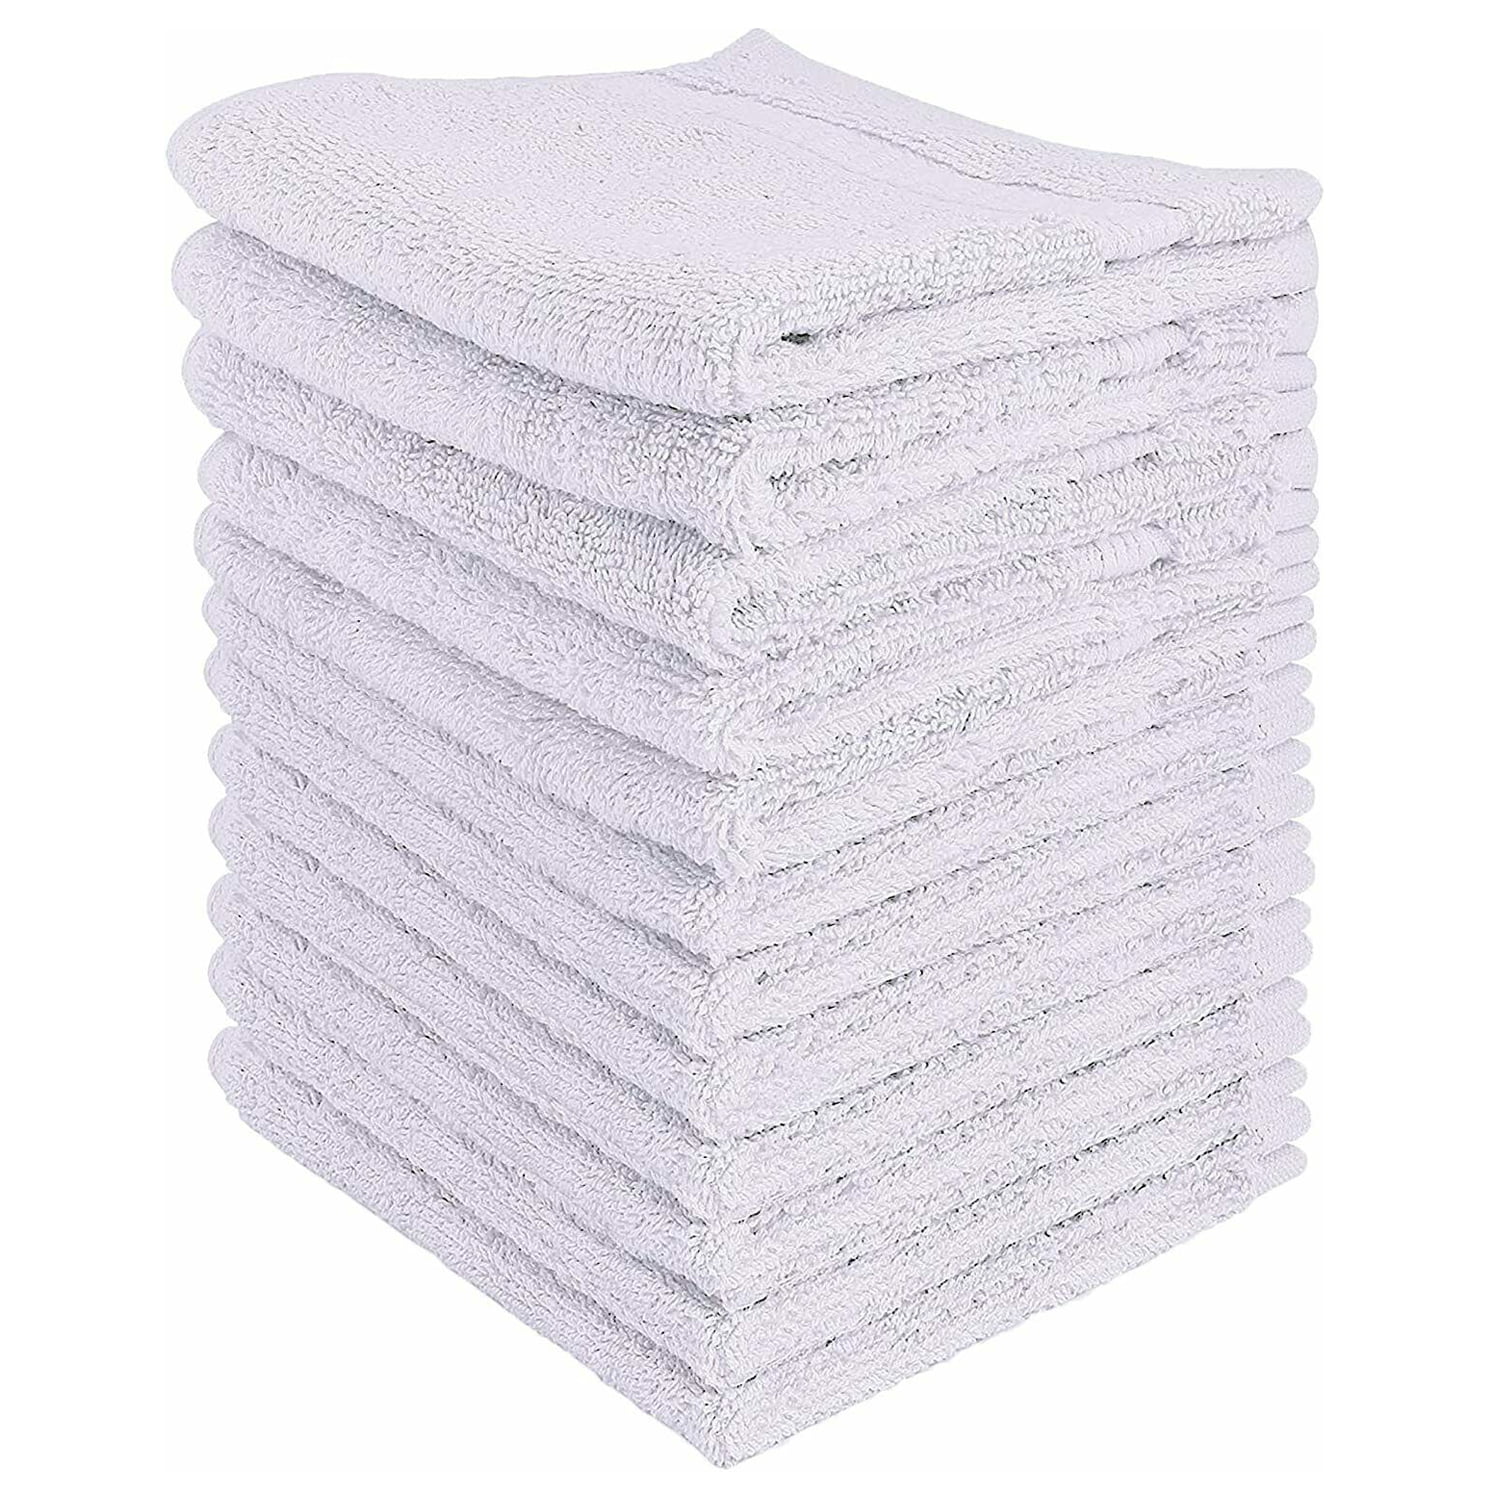 Bulk Spa White Washcloths Set of 24 Size 12 x 12 Thick Loop Pile Washcloth  Absorbent and Soft 100% Ring-Spun Cotton Wash Cloth Lint Free Face Towel  Wash Cloths Perfect for Bathroom